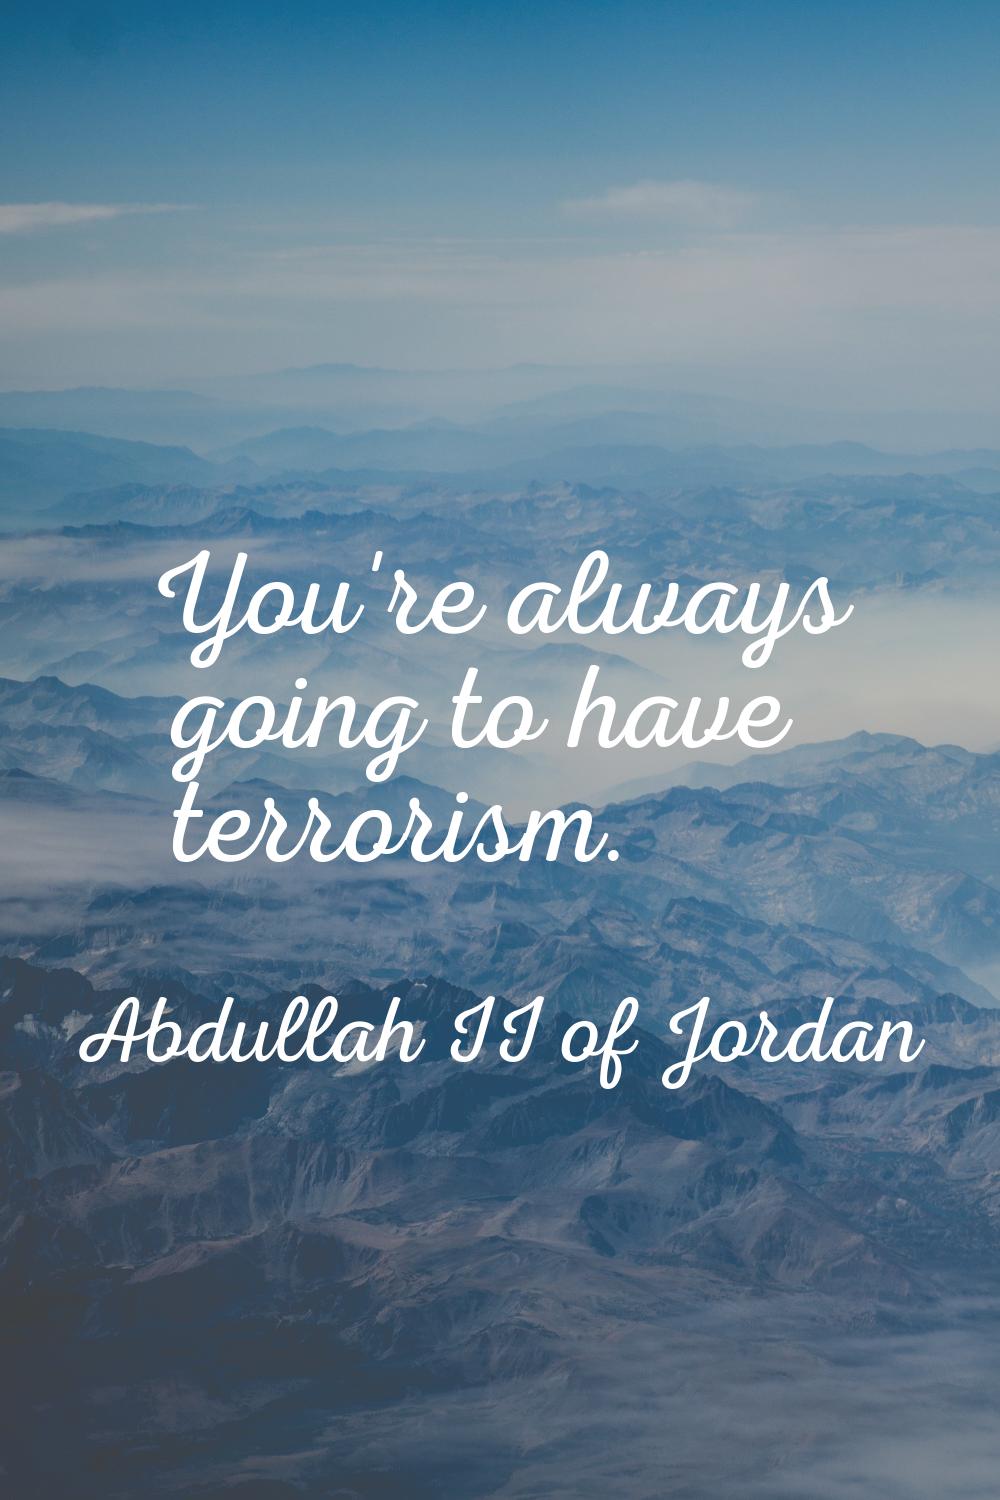 You're always going to have terrorism.